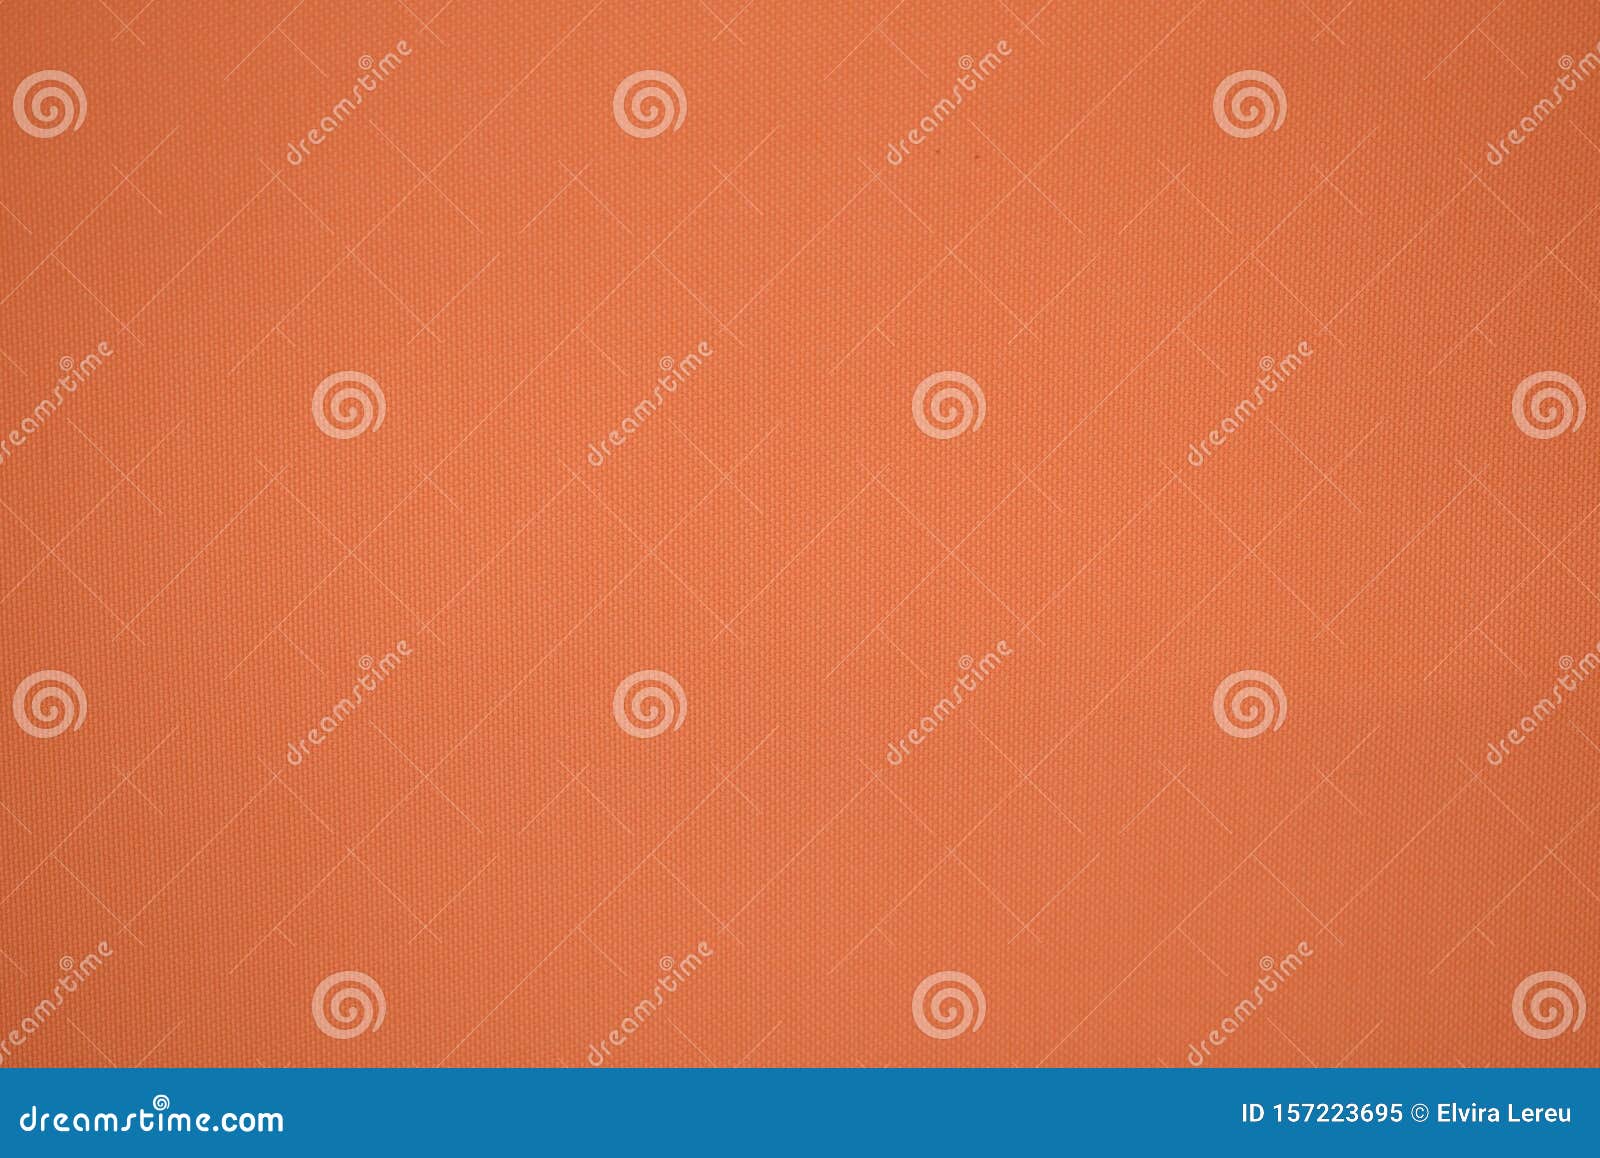 peach color background, fabric texture